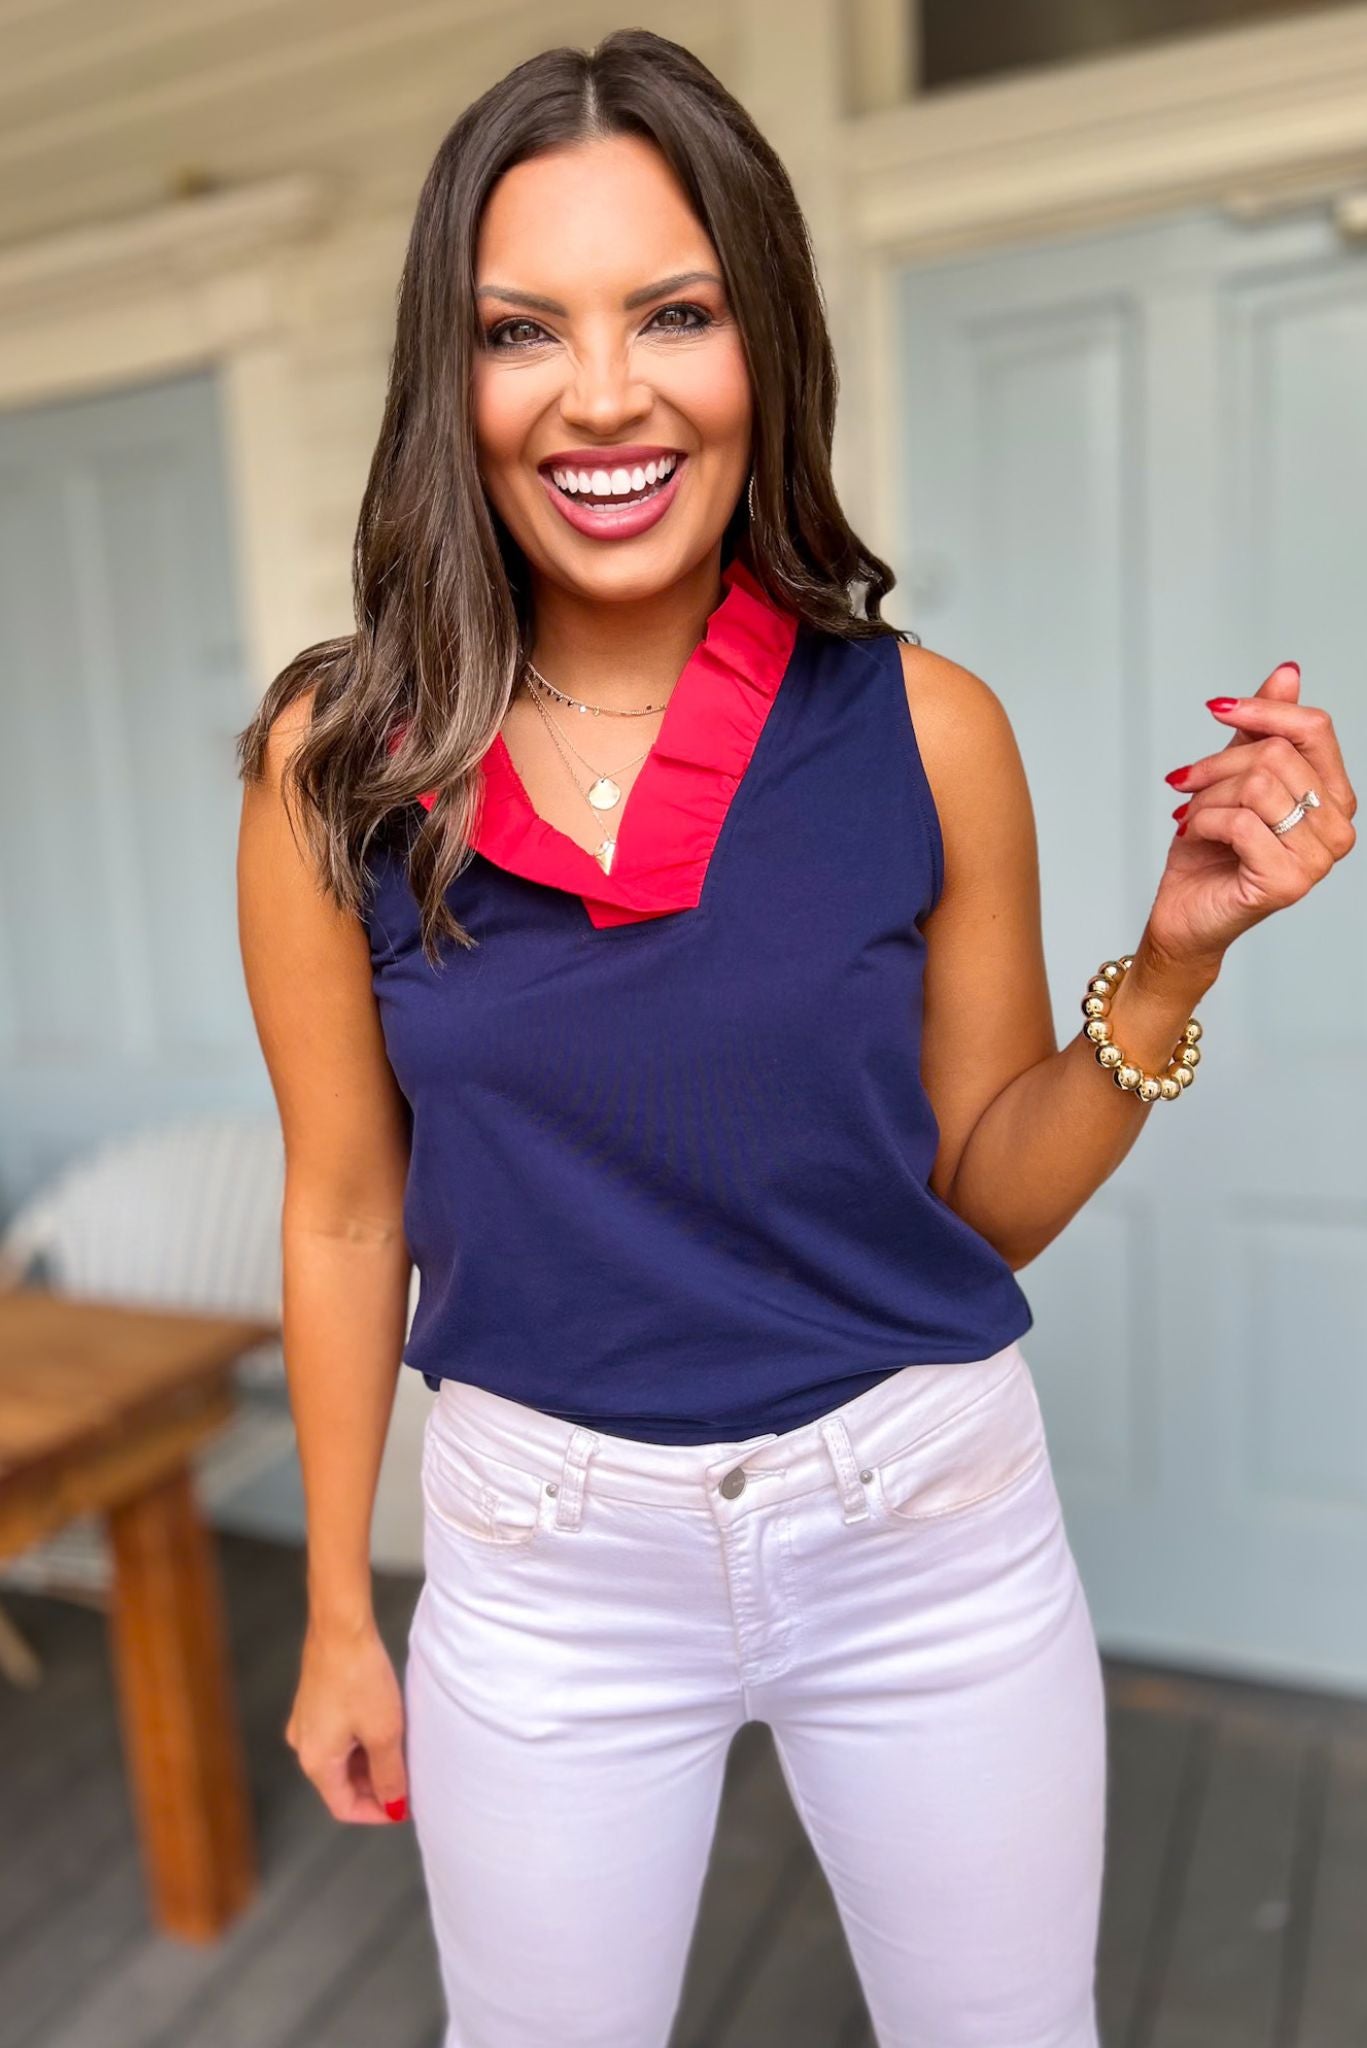  SSYS The Darcy Ruffle Colorblock Collar Sleeveless Top In Navy Red SSYS The Darcy Ruffle Colorblock Collar Sleeveless Top In Navy Red, ssys the label, ssys top, must have top, elevated top, summer style, summer top, mom style, Fourth of July collection, ssys by mallory fitzsimmons